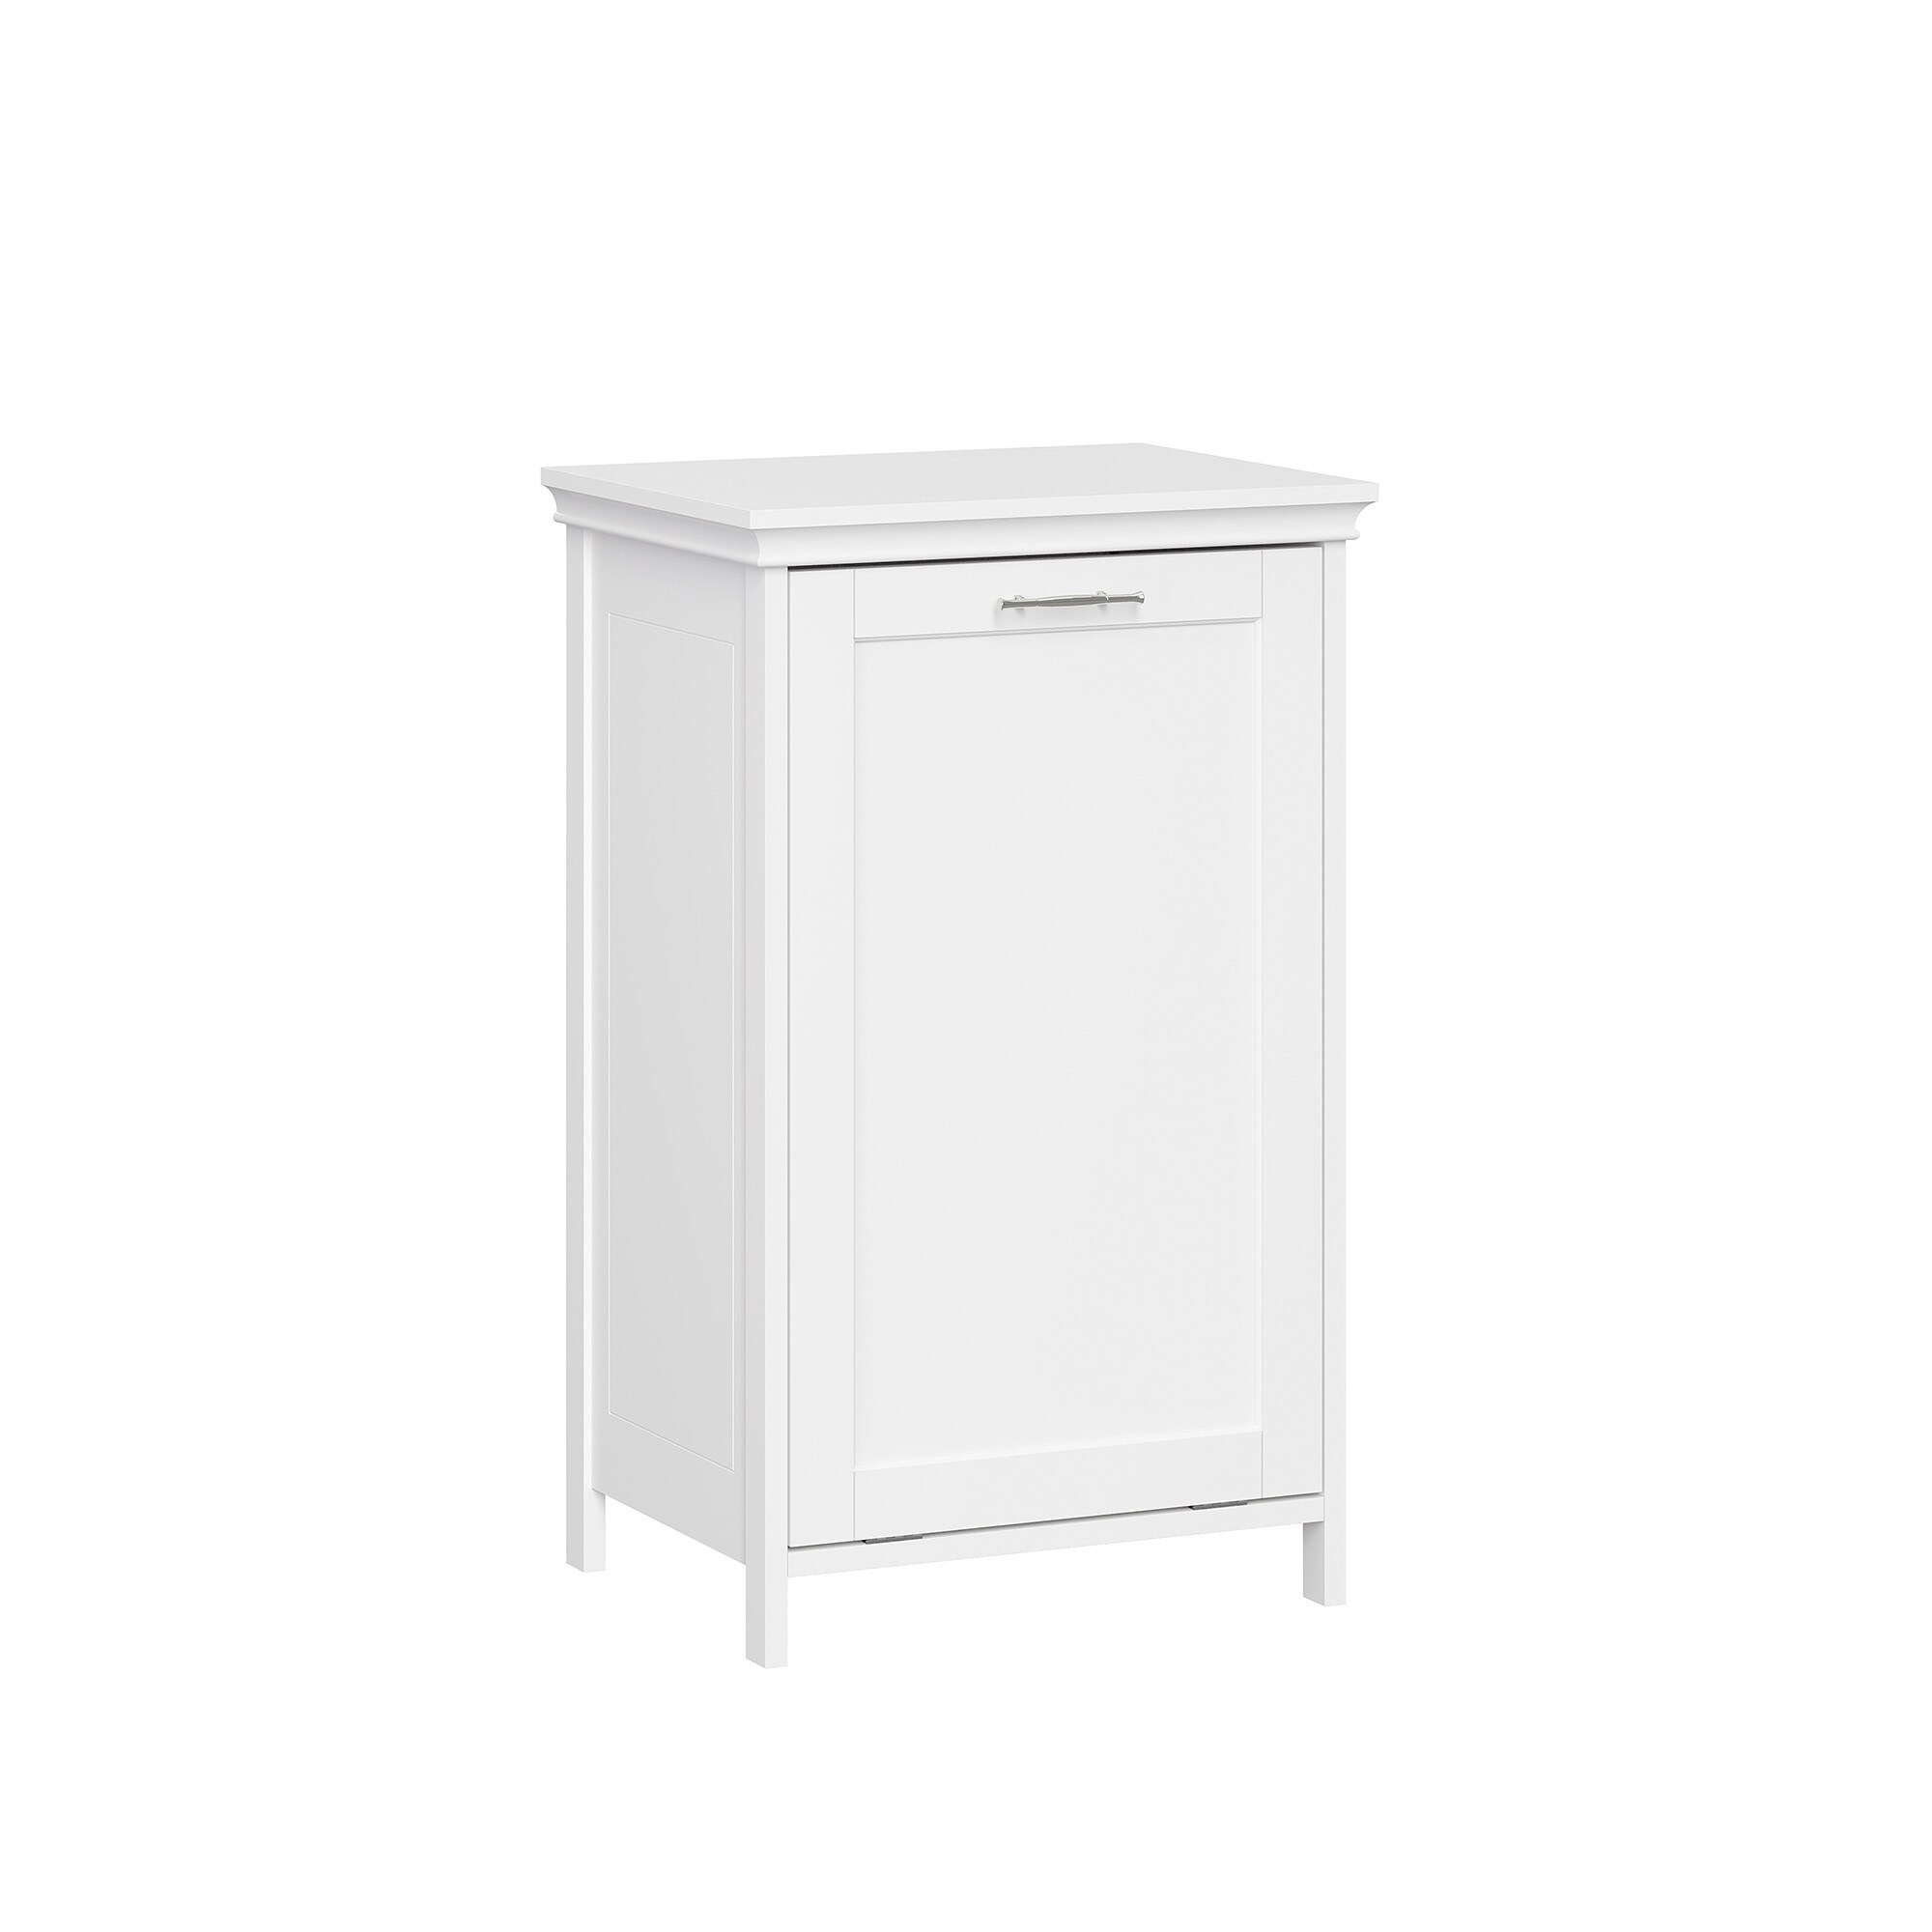 https://ak1.ostkcdn.com/images/products/is/images/direct/cf7a303809f5759829eedfe34164a03d7851ac15/Somerset-Tilt-Out-Laundry-Hamper%2C-White.jpg